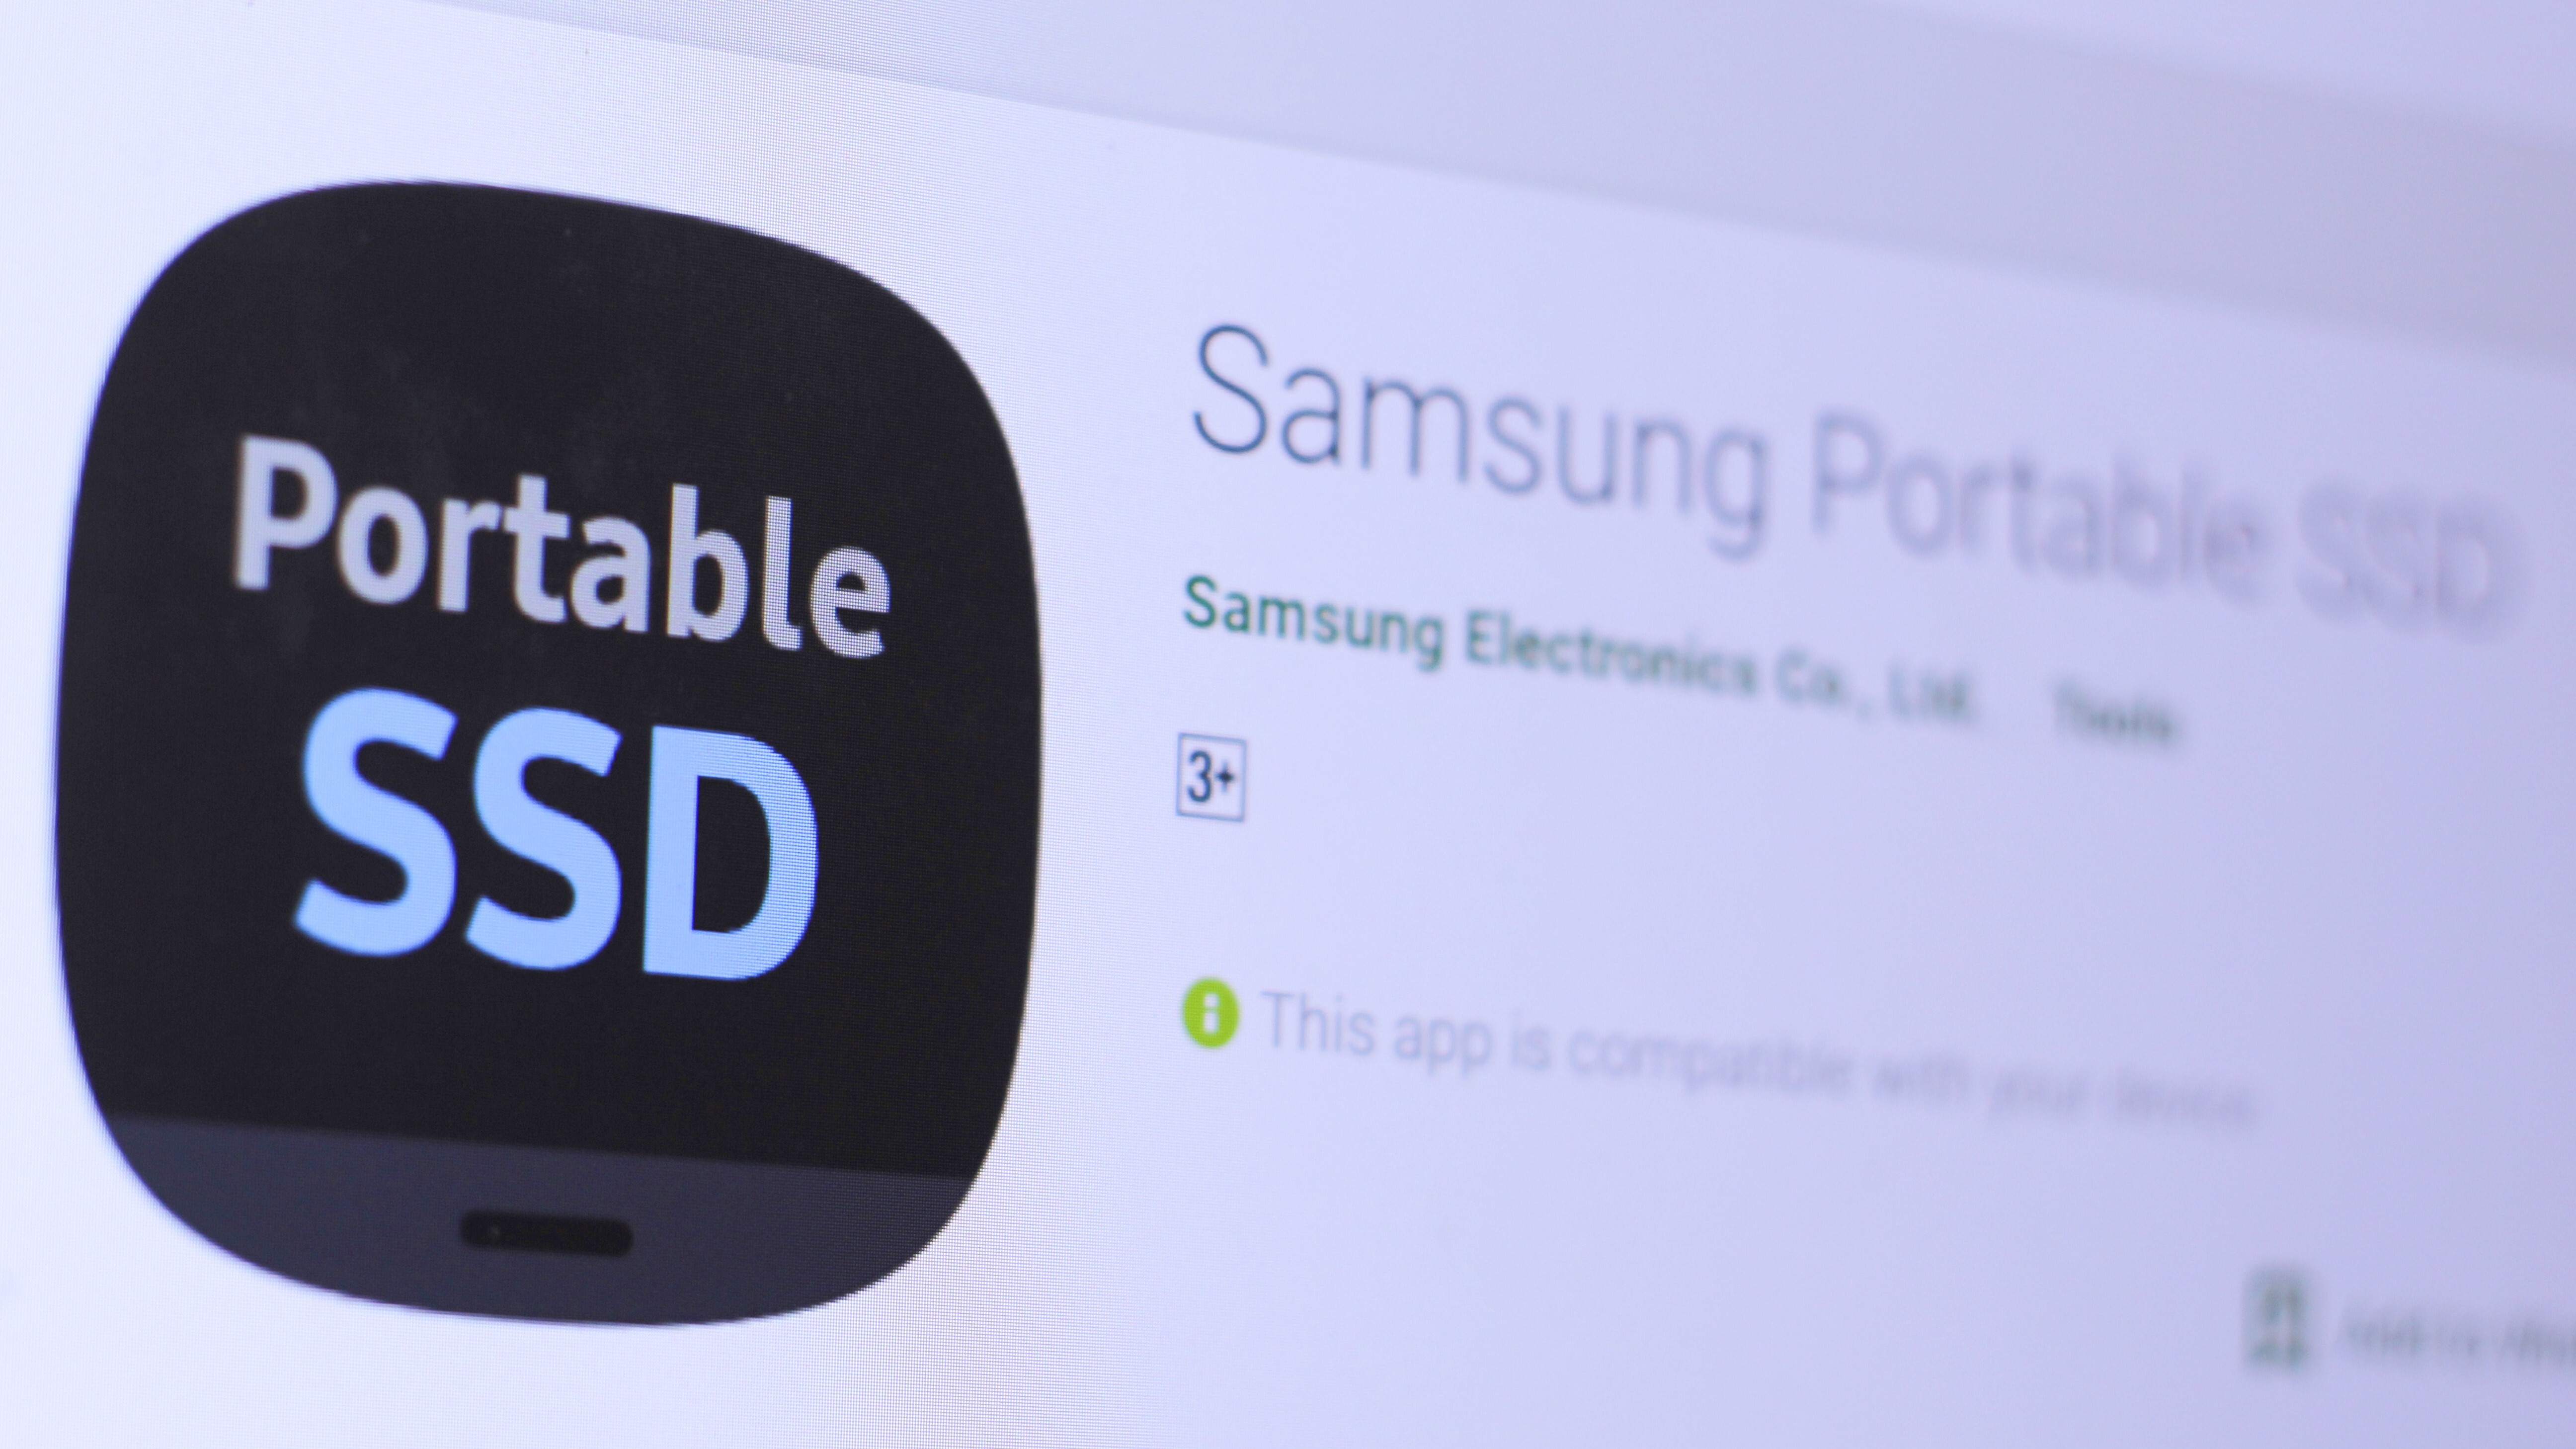 Samsung Preps T9 Portable SSD With Speeds up to 2 GB/S